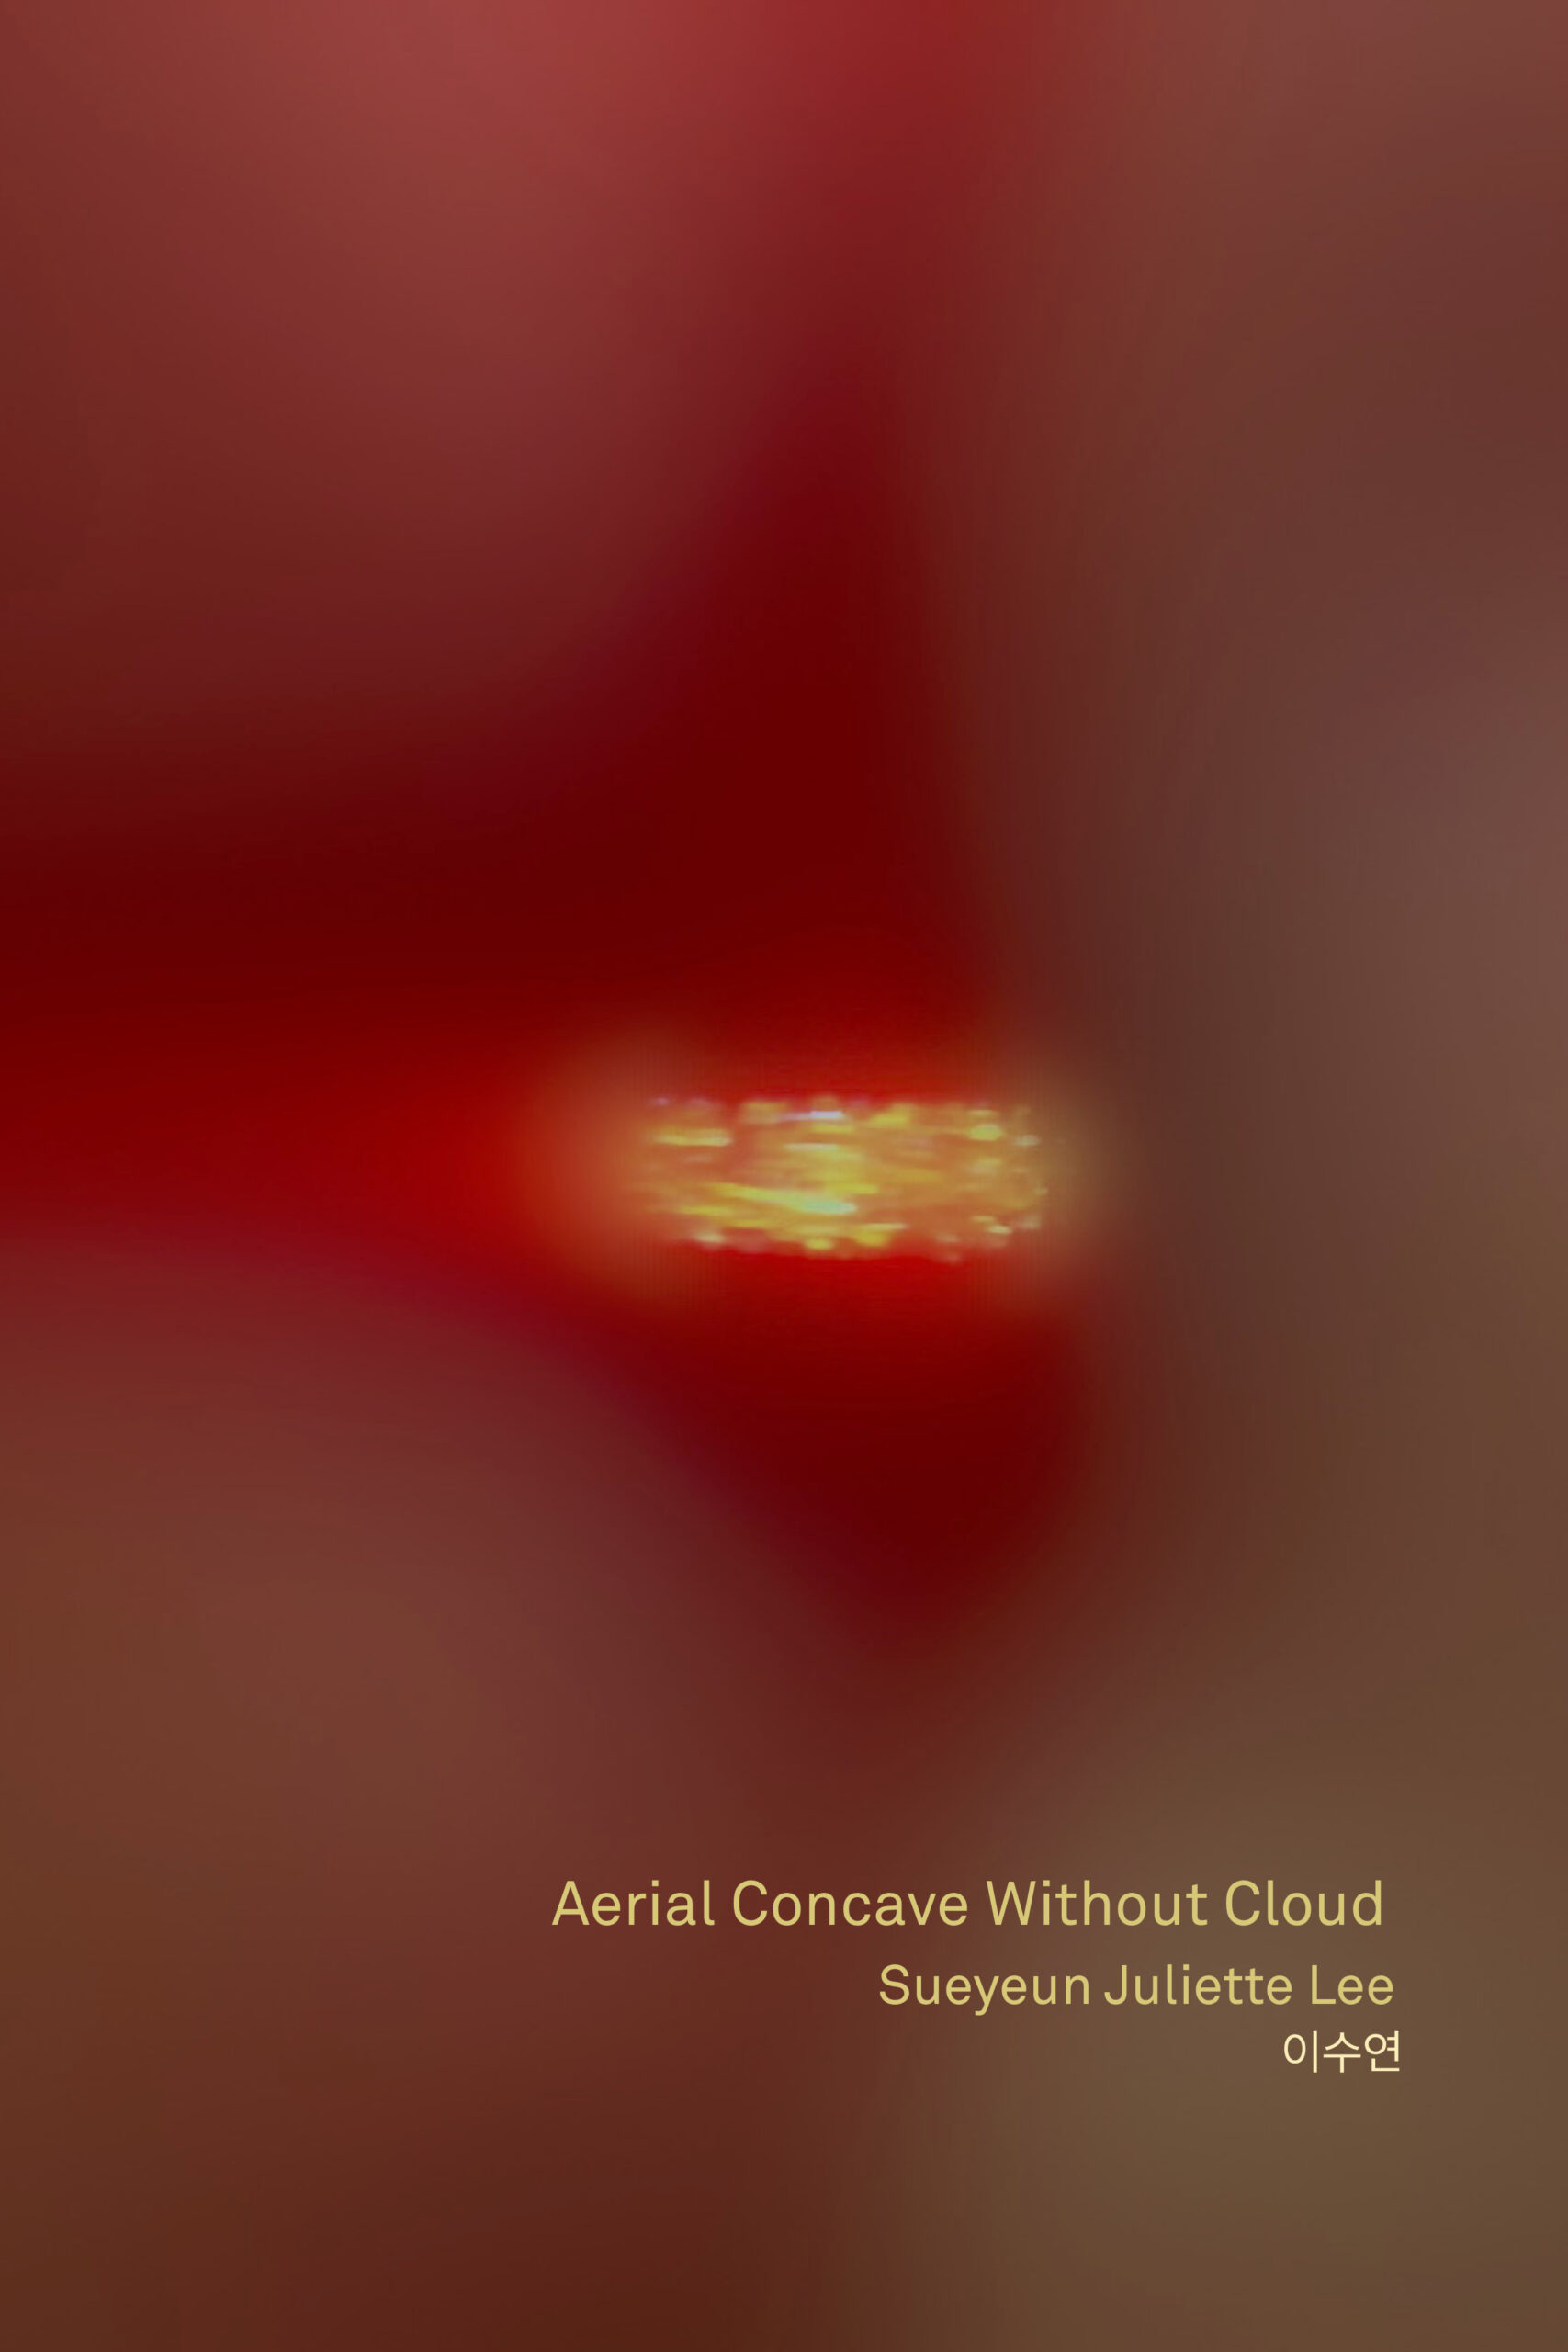 Aerial Concave Without Cloud by Sueyeun Juliette Lee